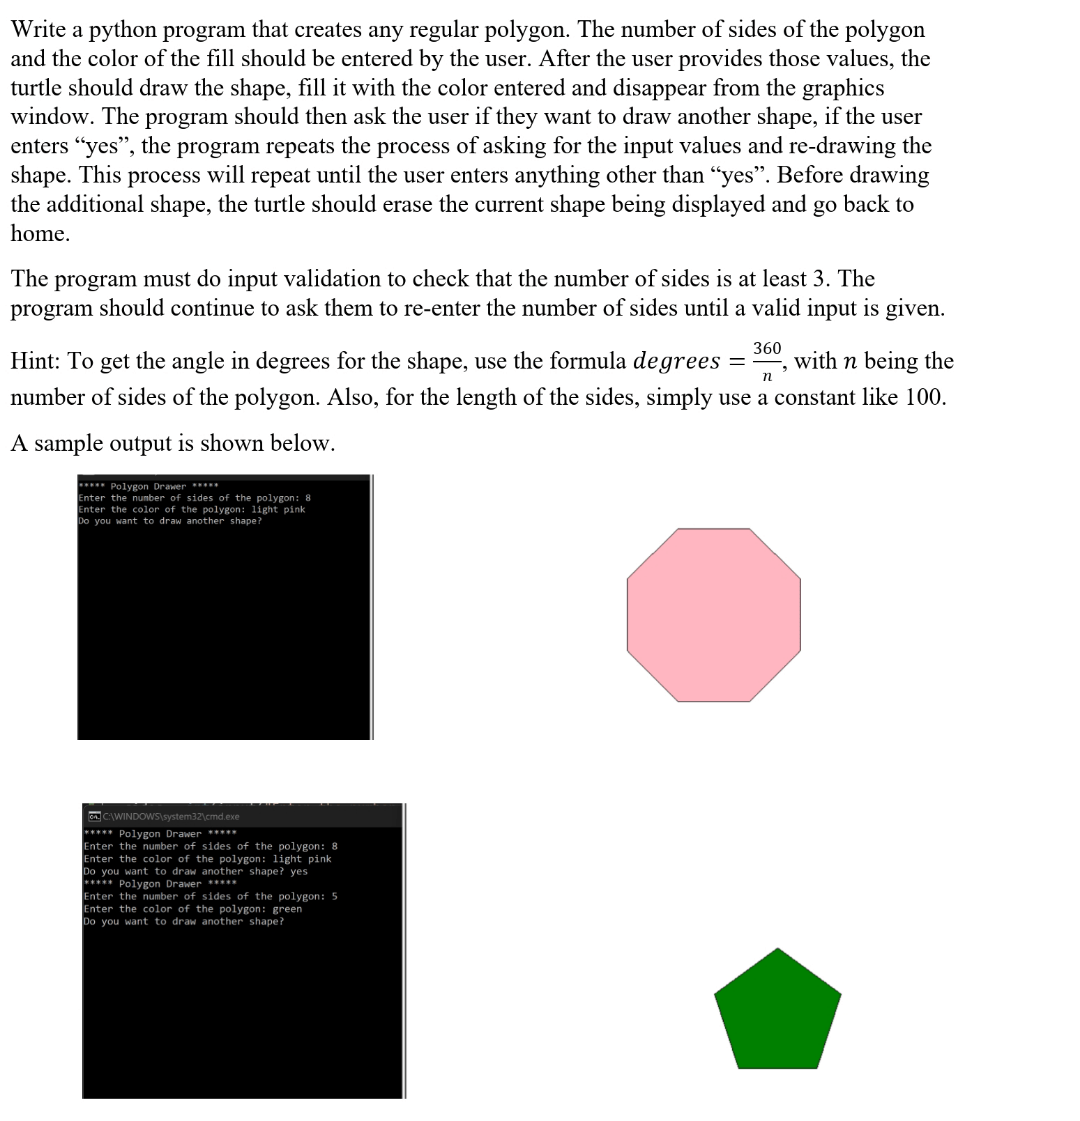 Write a Python program that creates any regular polygon. The number of sides of the polygon and the color of the fill should be entered by the user. After the user provides those values, the turtle should draw the shape, fill it with the color entered, and disappear from the graphics window. The program should then ask the user if they want to draw another shape. If the user enters "yes", the program repeats the process of asking for the input values and re-drawing the shape. This process will repeat until the user enters anything other than "yes". Before drawing the additional shape, the turtle should erase the current shape being displayed and go back to home. The program must do input validation to check that the number of sides is at least 3. The program should continue to ask them to re-enter the number of sides until a valid input is given. Hint: To get the angle in degrees for the shape, use the formula degrees = n * 360, with n being the number of sides of the polygon. Also, for the length of the sides, simply use a constant like 100. A sample output is shown below.